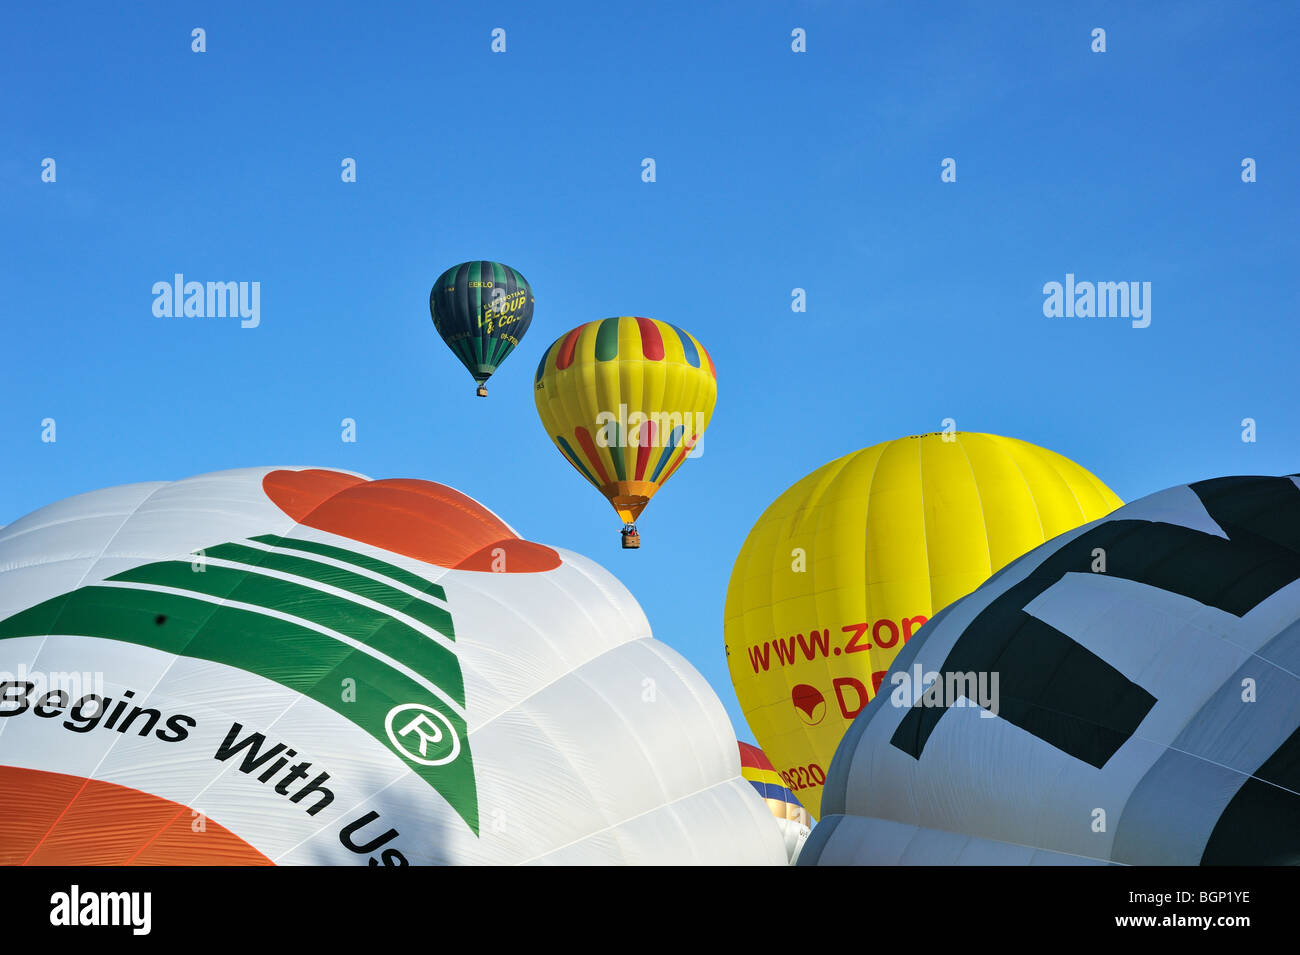 Balloonists / Aeronauts flying with hot-air balloons during hot air ballooning meeting Stock Photo